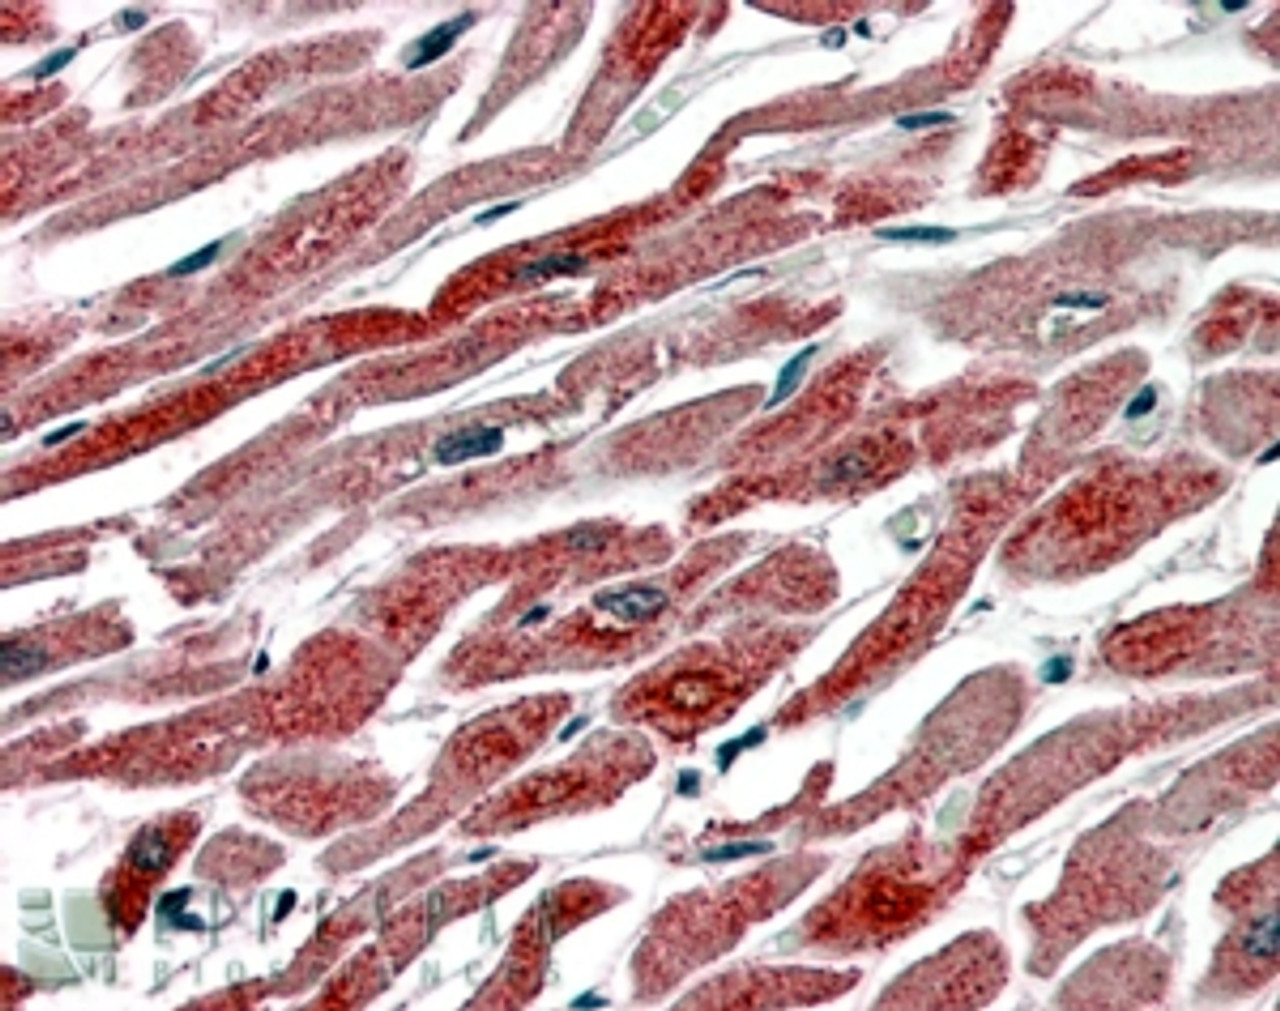 45-124 (3.8ug/ml) staining of paraffin embedded Human Heart. Steamed antigen retrieval with citrate buffer pH 6, AP-staining. <strong>This data is from a previous batch, not on sale.</strong>